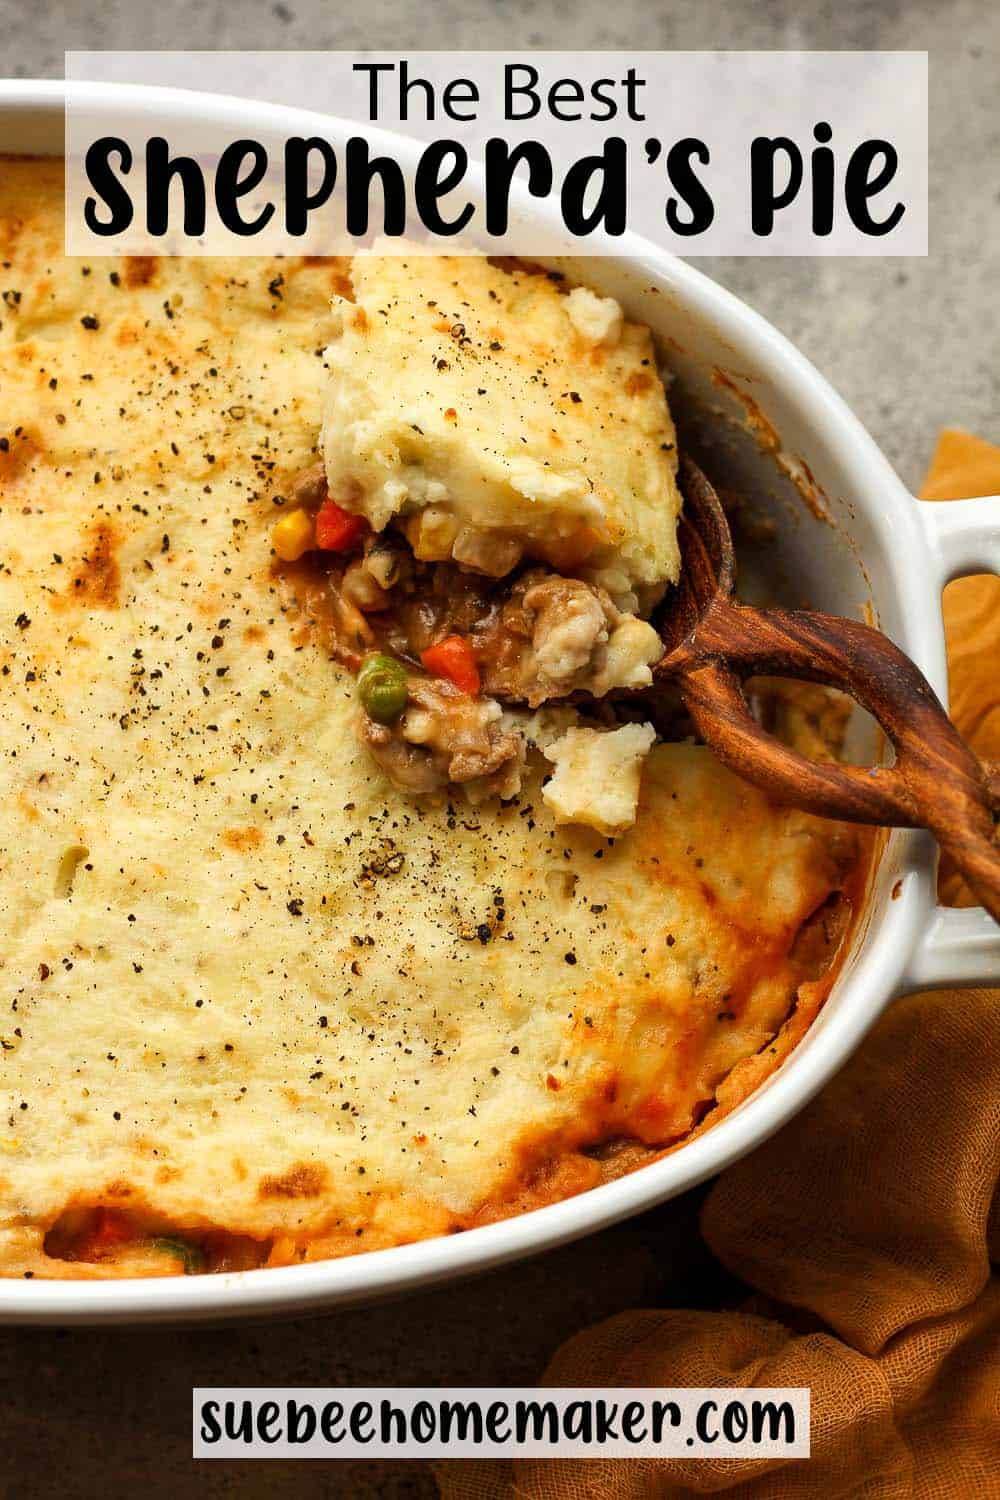 A casserole dish with a spoonful of shepherd's pie.